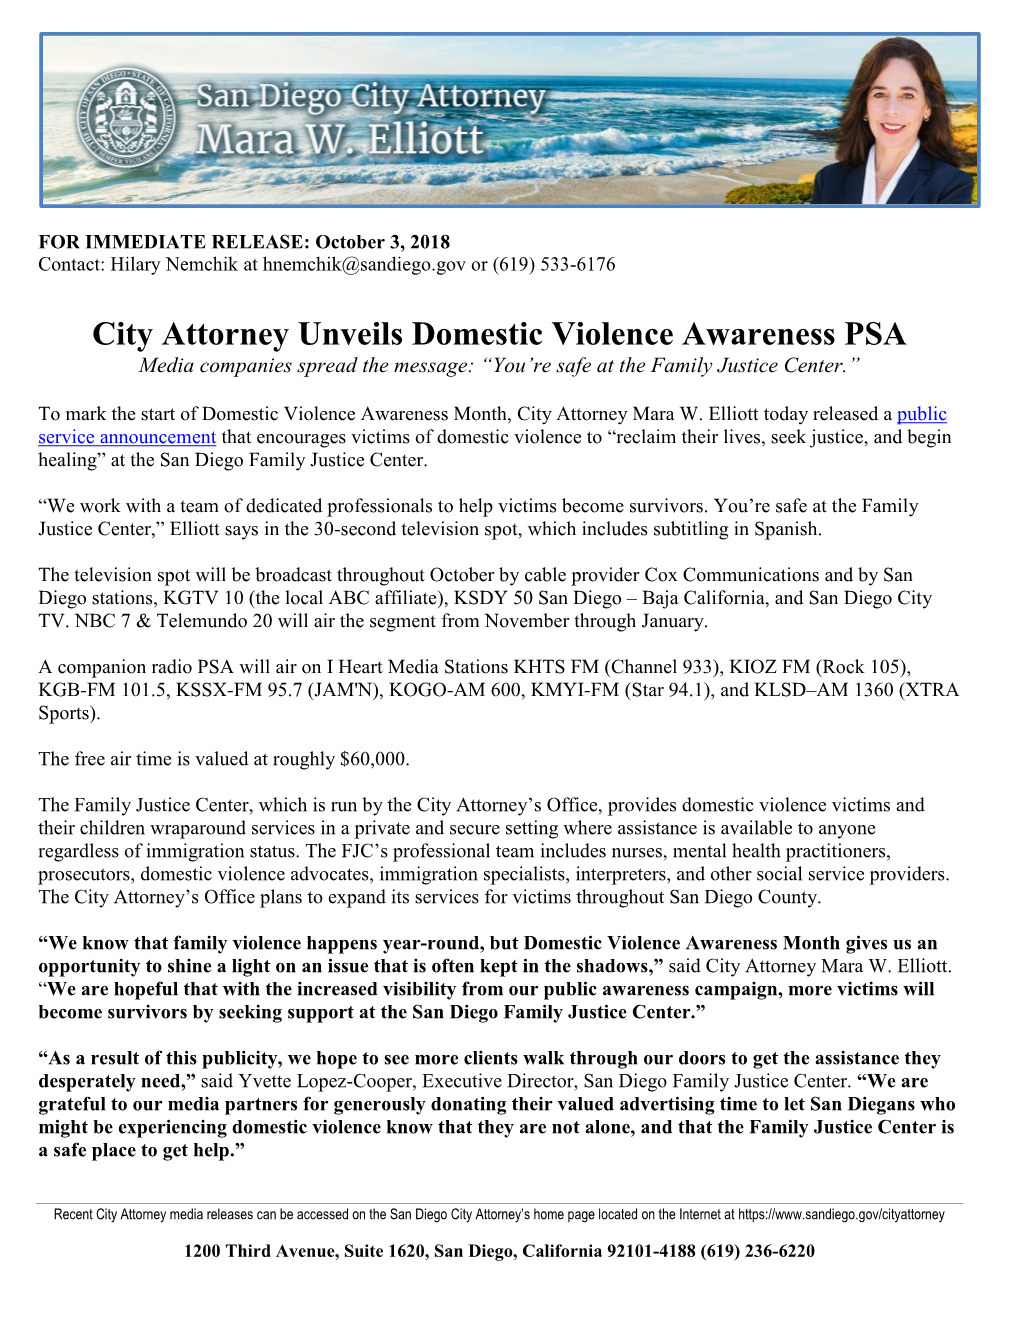 City Attorney Unveils Domestic Violence Awareness PSA Media Companies Spread the Message: “You’Re Safe at the Family Justice Center.”